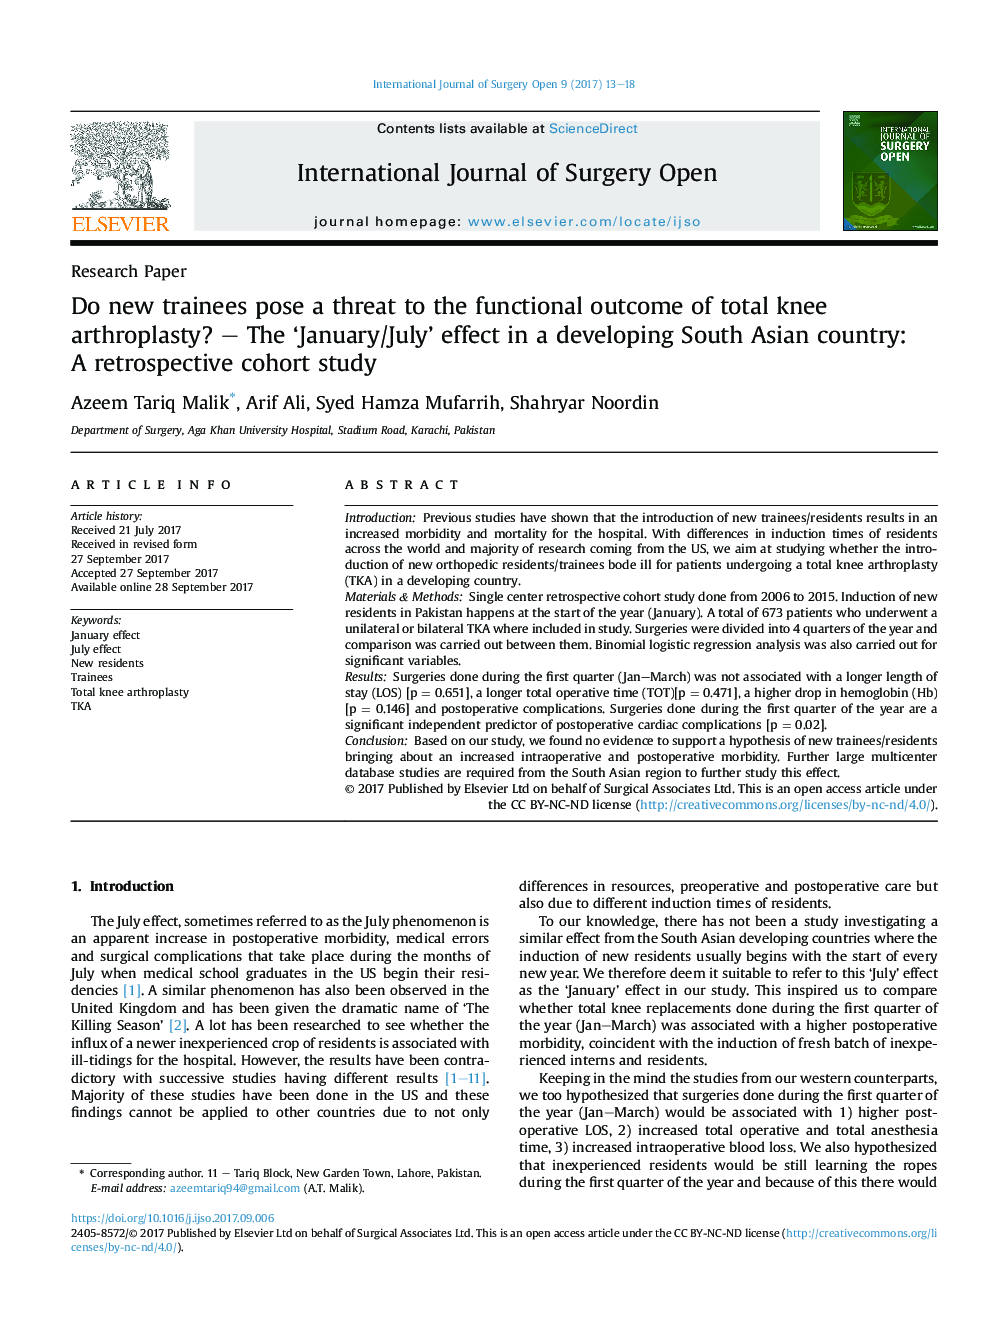 Do new trainees pose a threat to the functional outcome of total knee arthroplasty? - The 'January/July' effect in a developing South Asian country: AÂ retrospective cohort study